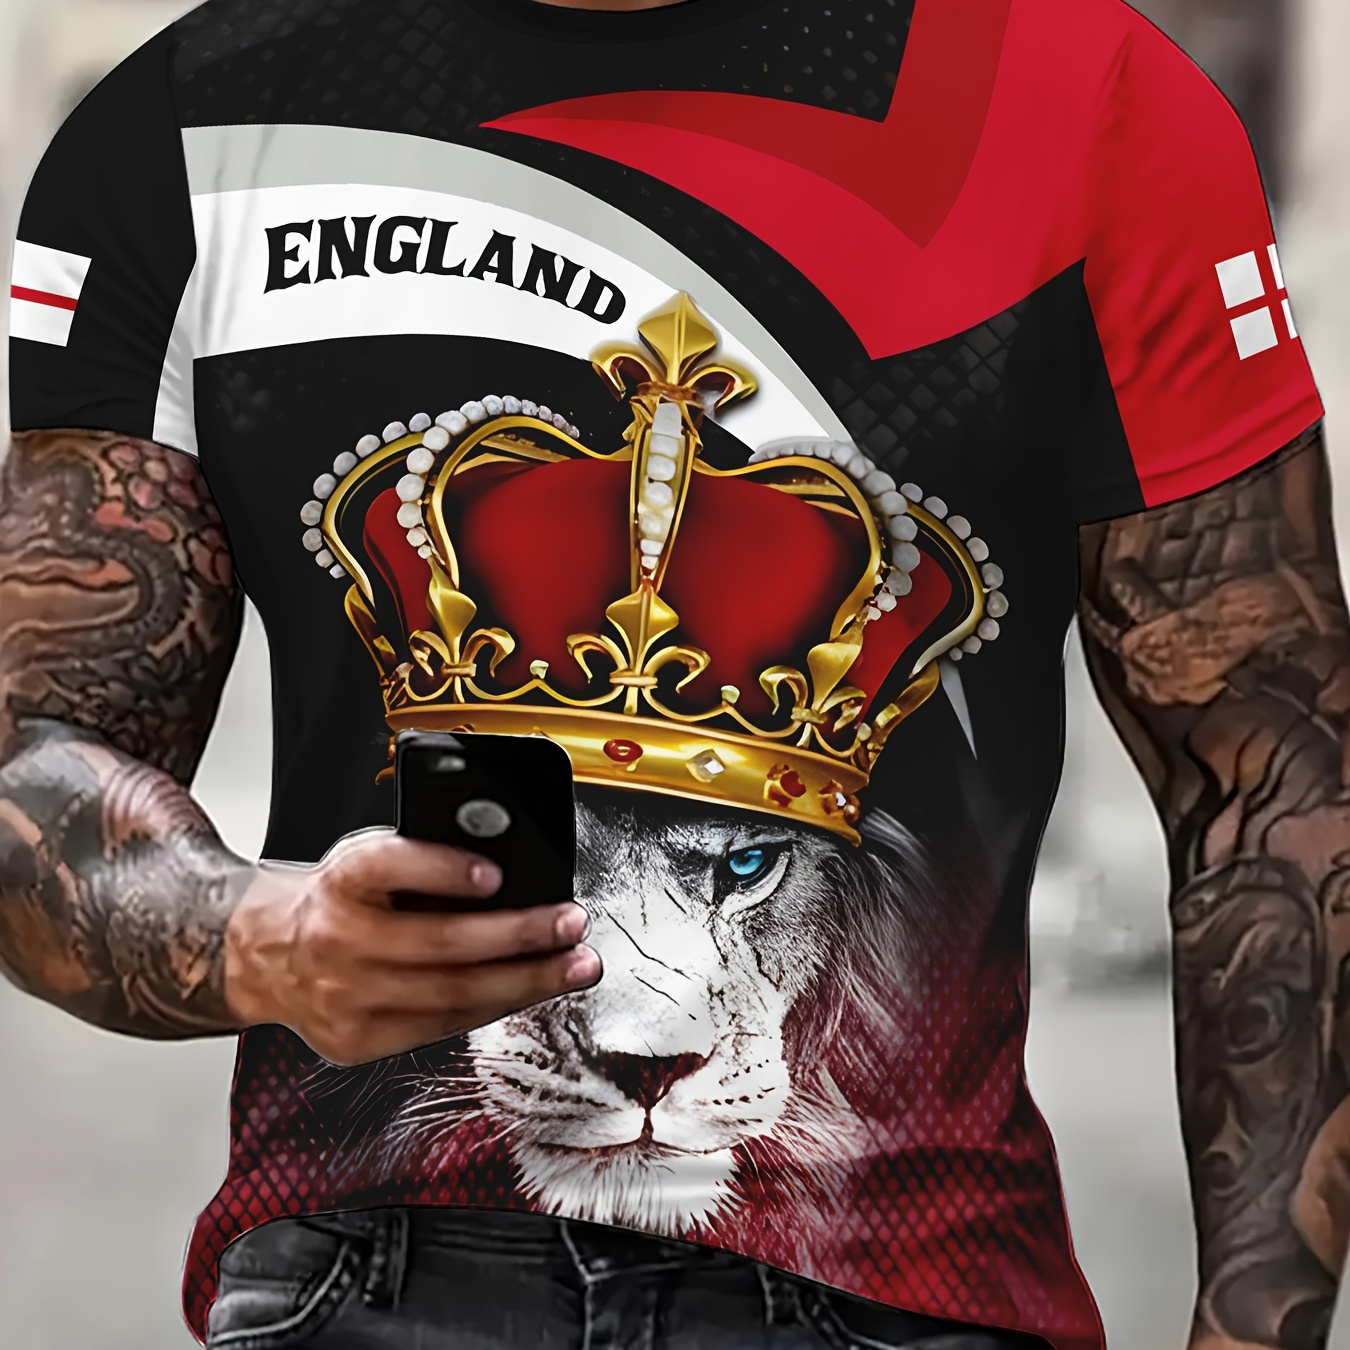 

England Lion With Crown 3d Print Men's Fashion Comfy Breathable T-shirt, New Casual Round Neck Short Sleeve Tee For Spring Summer Men's Clothing